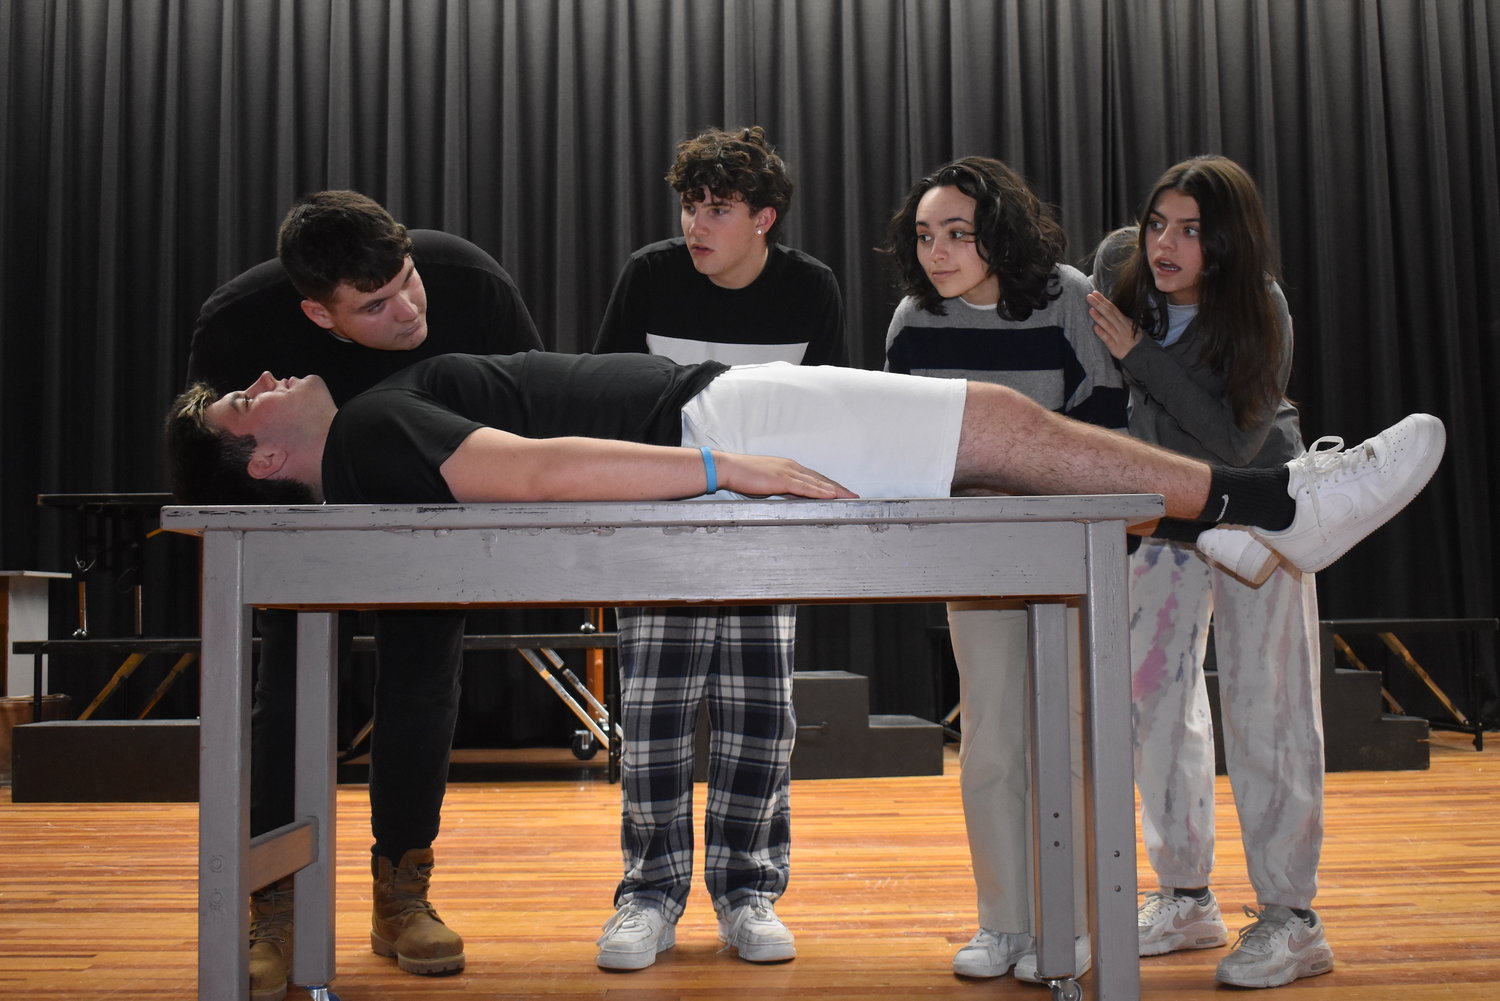 Students, from left, Karl Leudesdorff, Dylan Quinn, Troy Tyznar, Erin Ortiz and Raelyn Luft rehearse a scene from the upcoming musical.